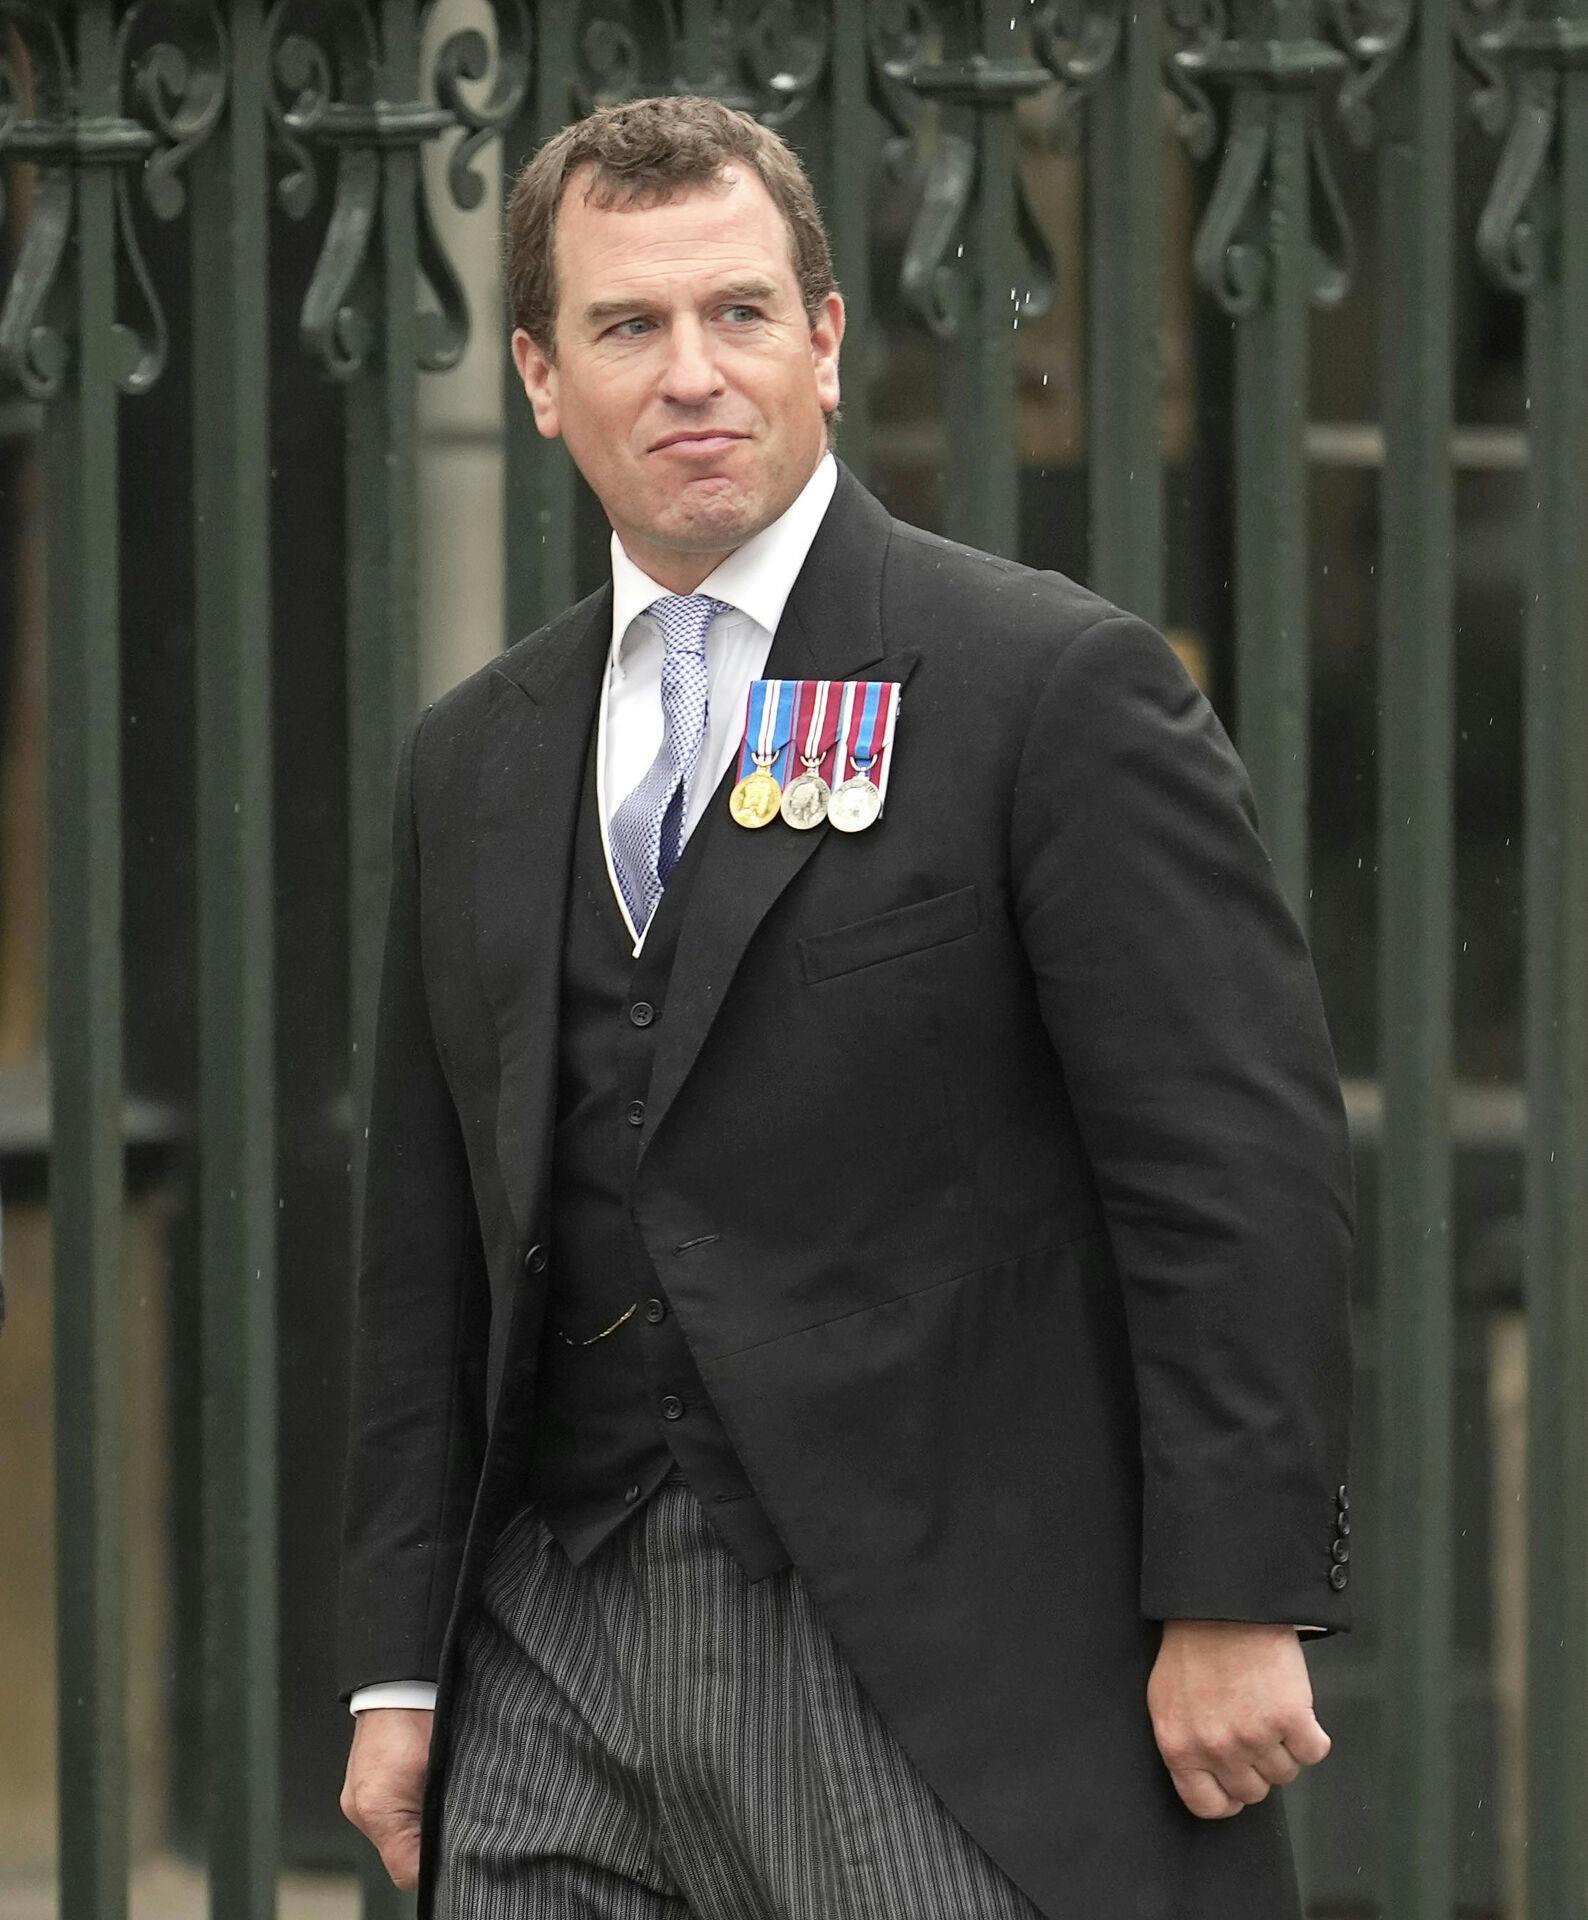 Peter Phillips arrives to attend Britain's King Charles III and Queen Consort Camilla's coronation ceremony, at Westminster Abbey, in London, Saturday, May 6, 2023. (AP Photo/Kin Cheung)